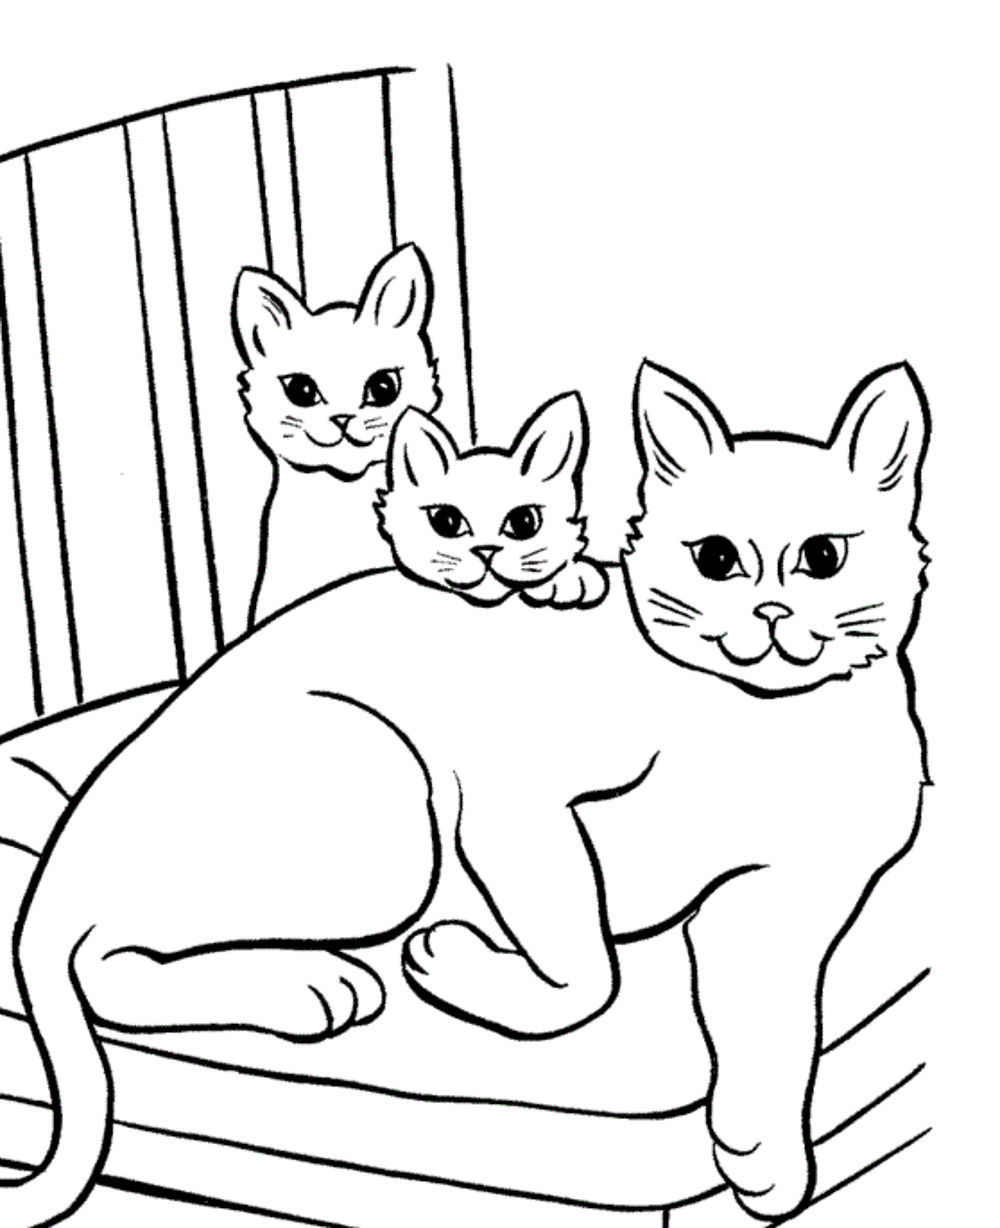 print-download-the-benefit-of-cat-coloring-pages